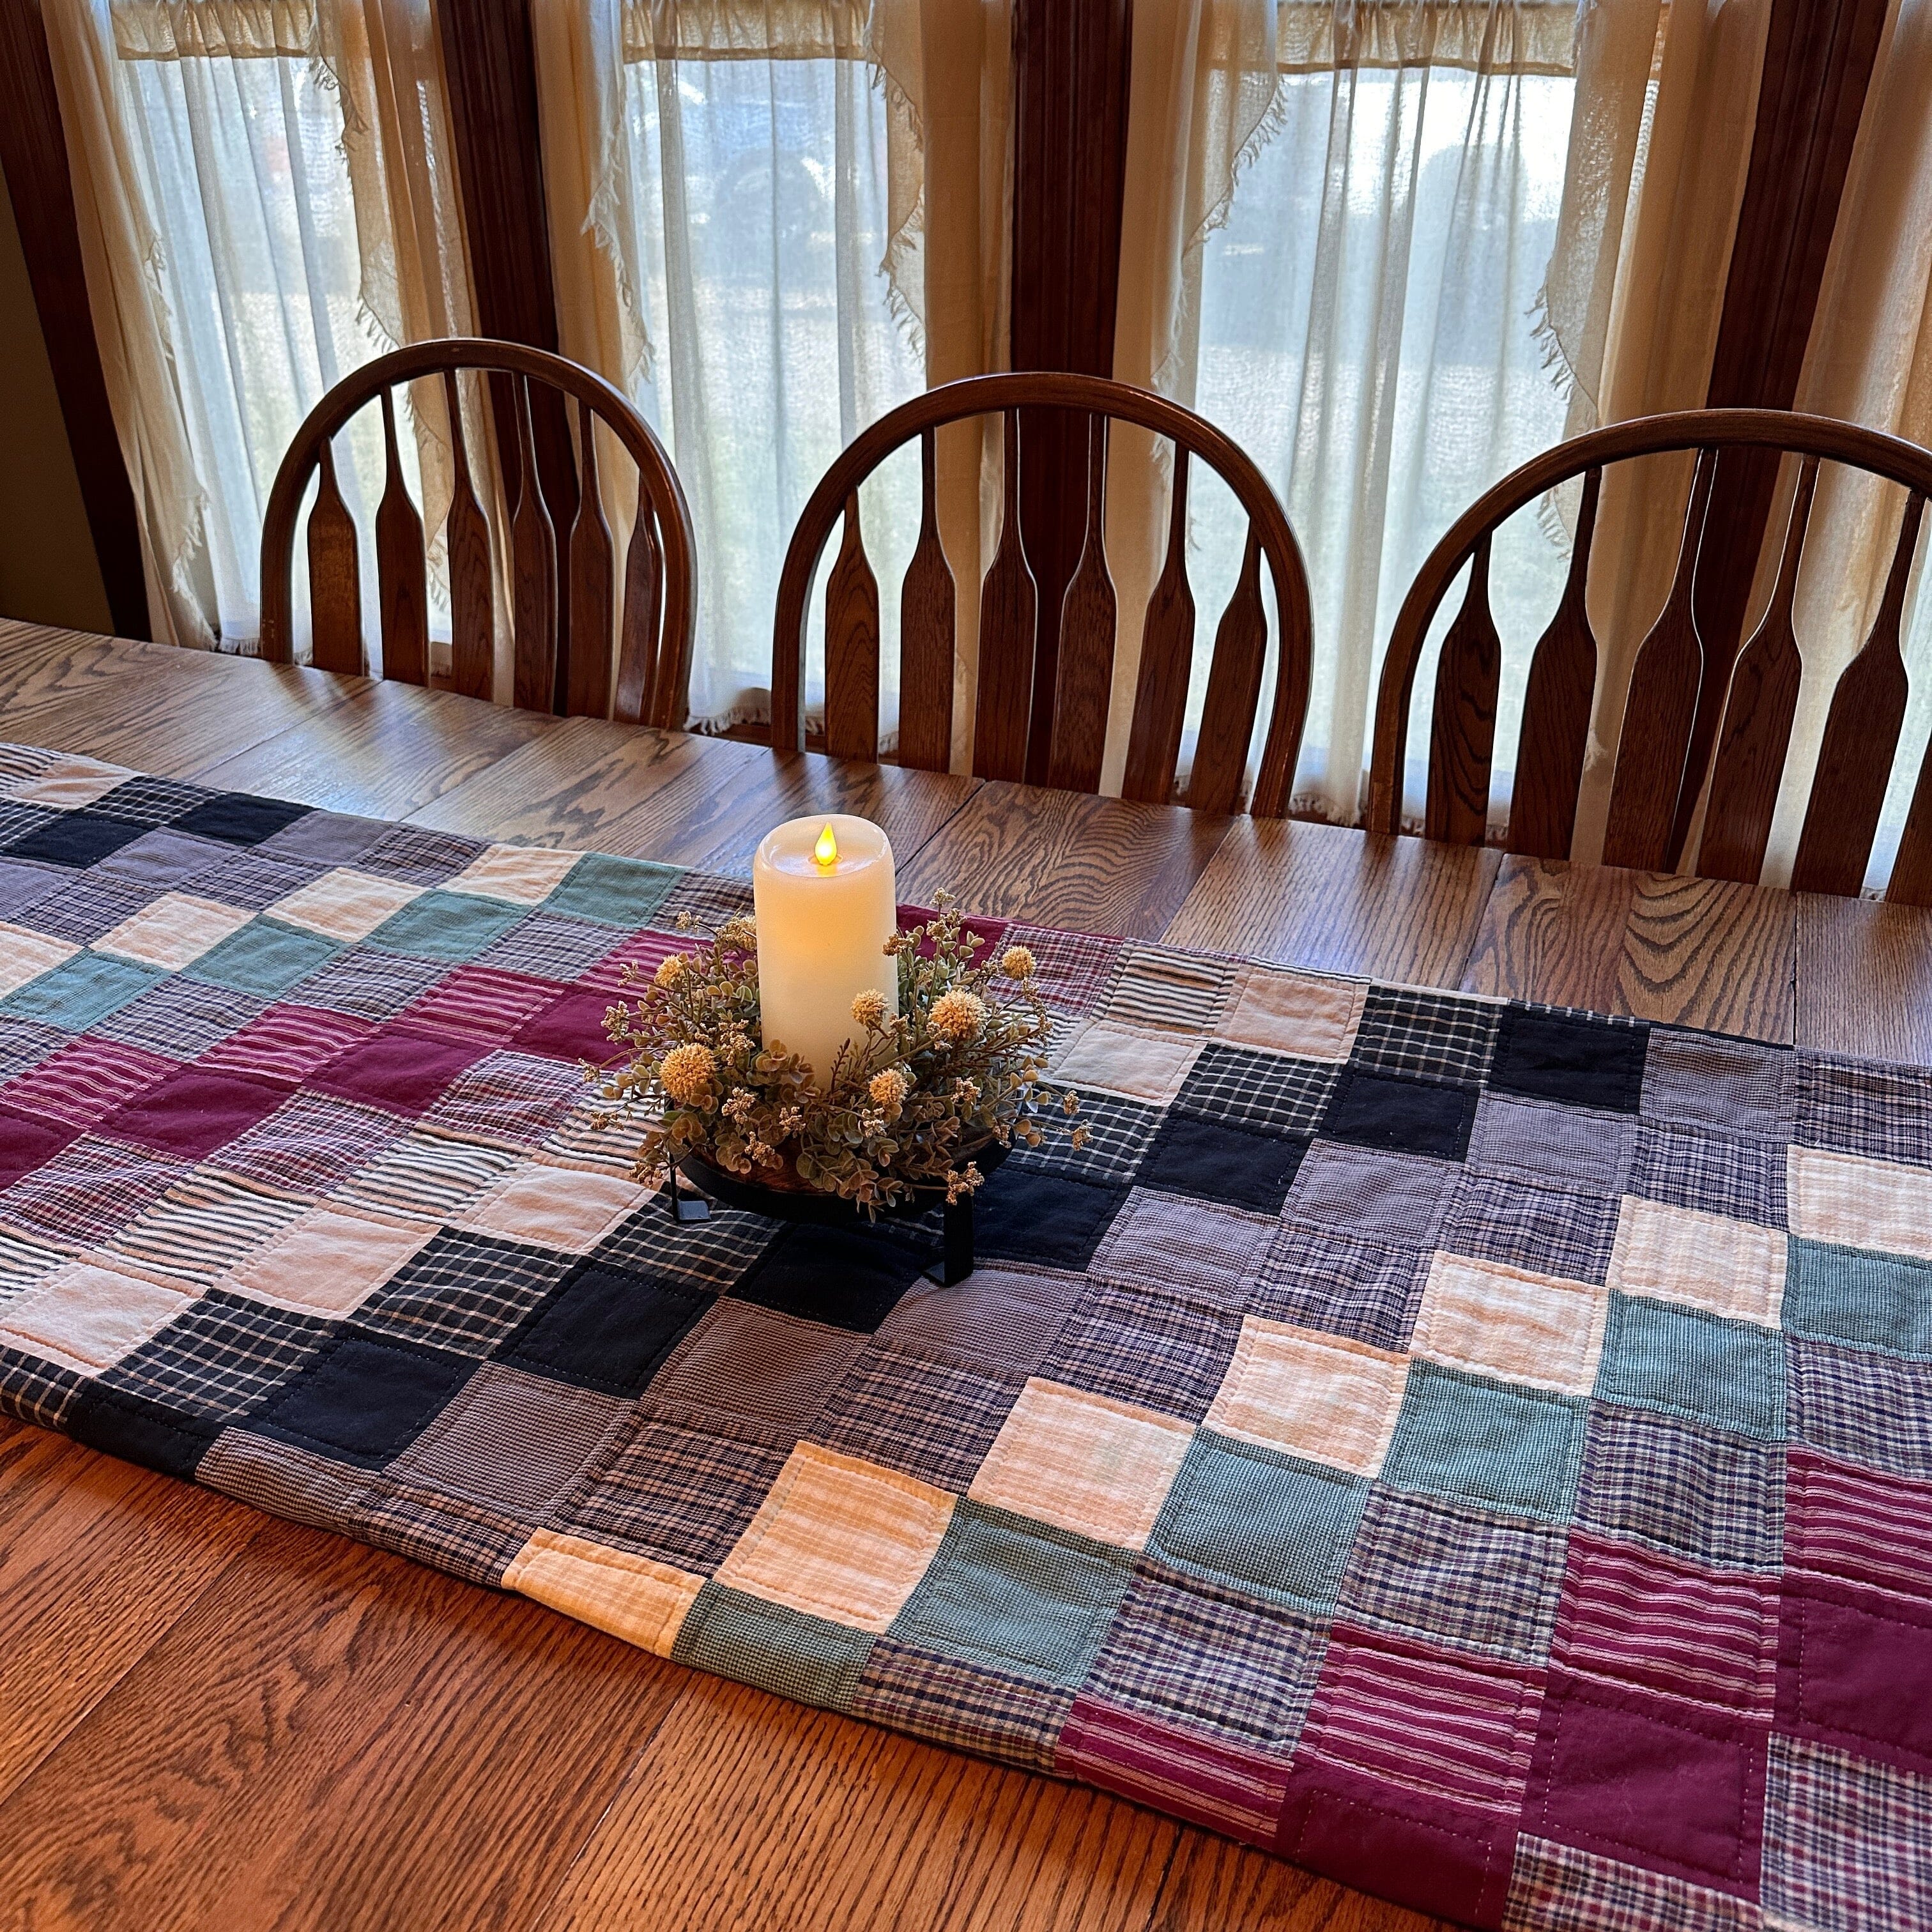 How to Display a Quilt